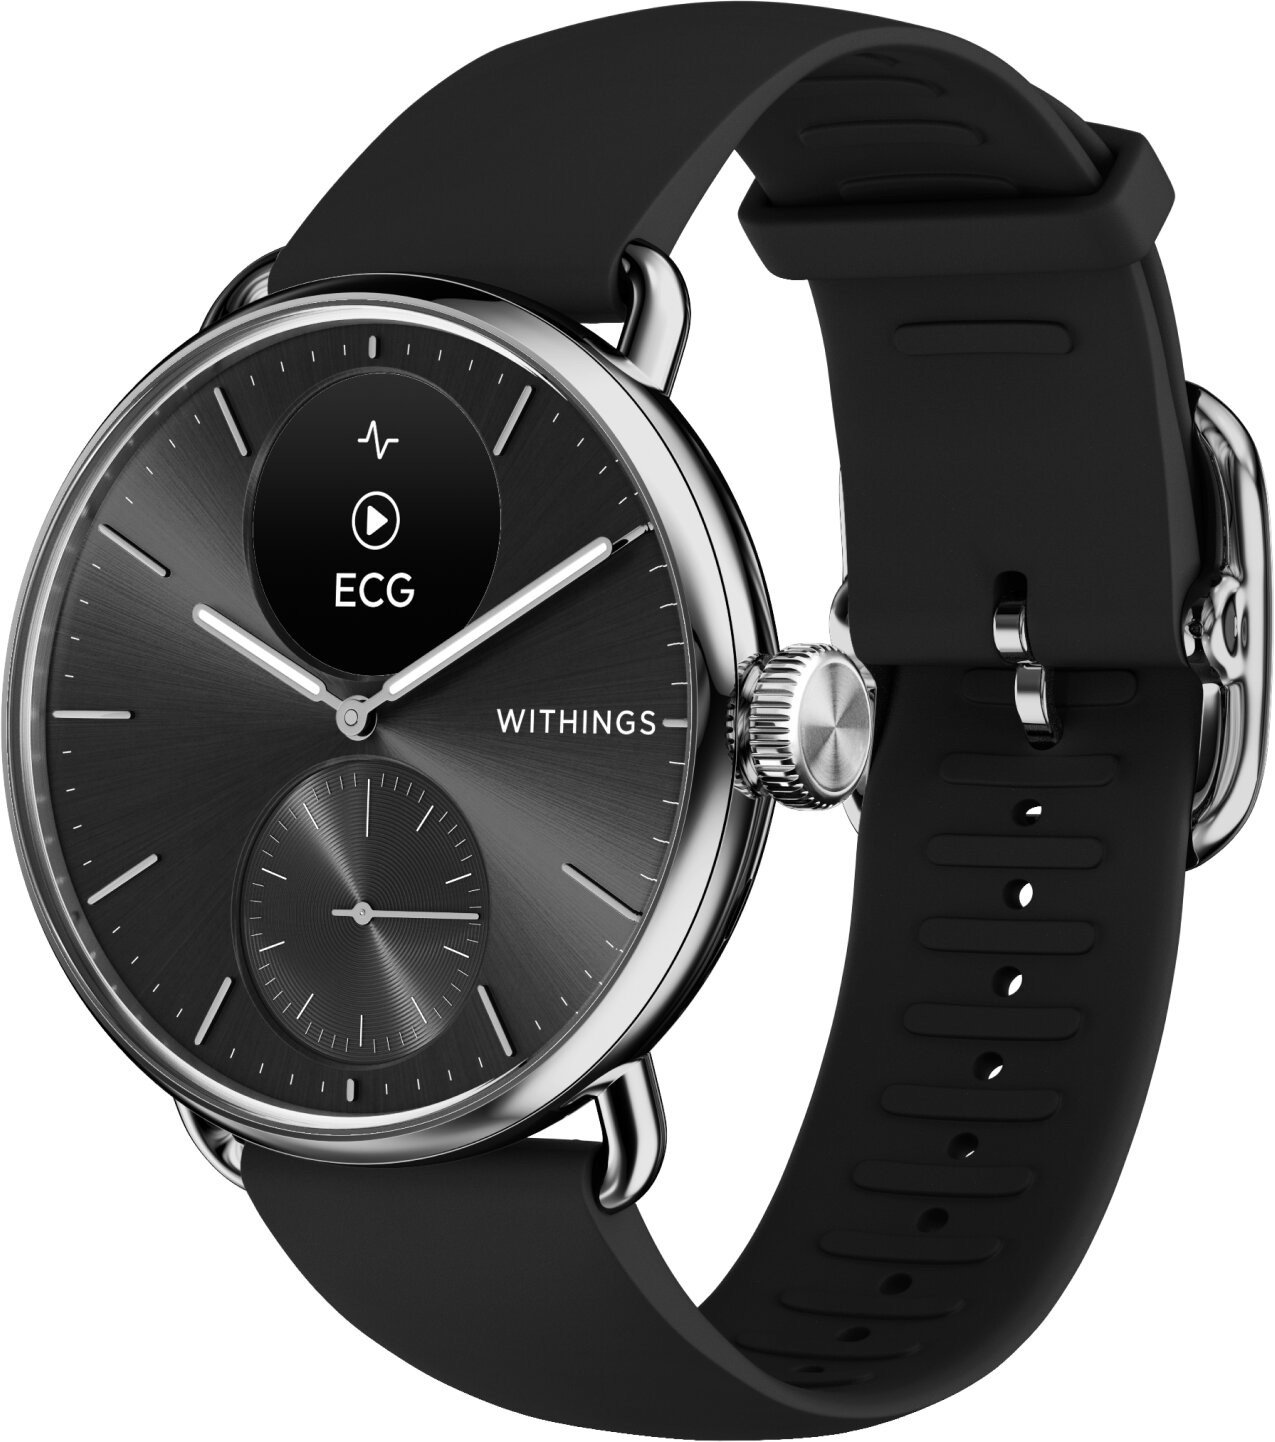 Withings Scanwatch 2 / 38mm Black - HWA10-model 1-All-Int